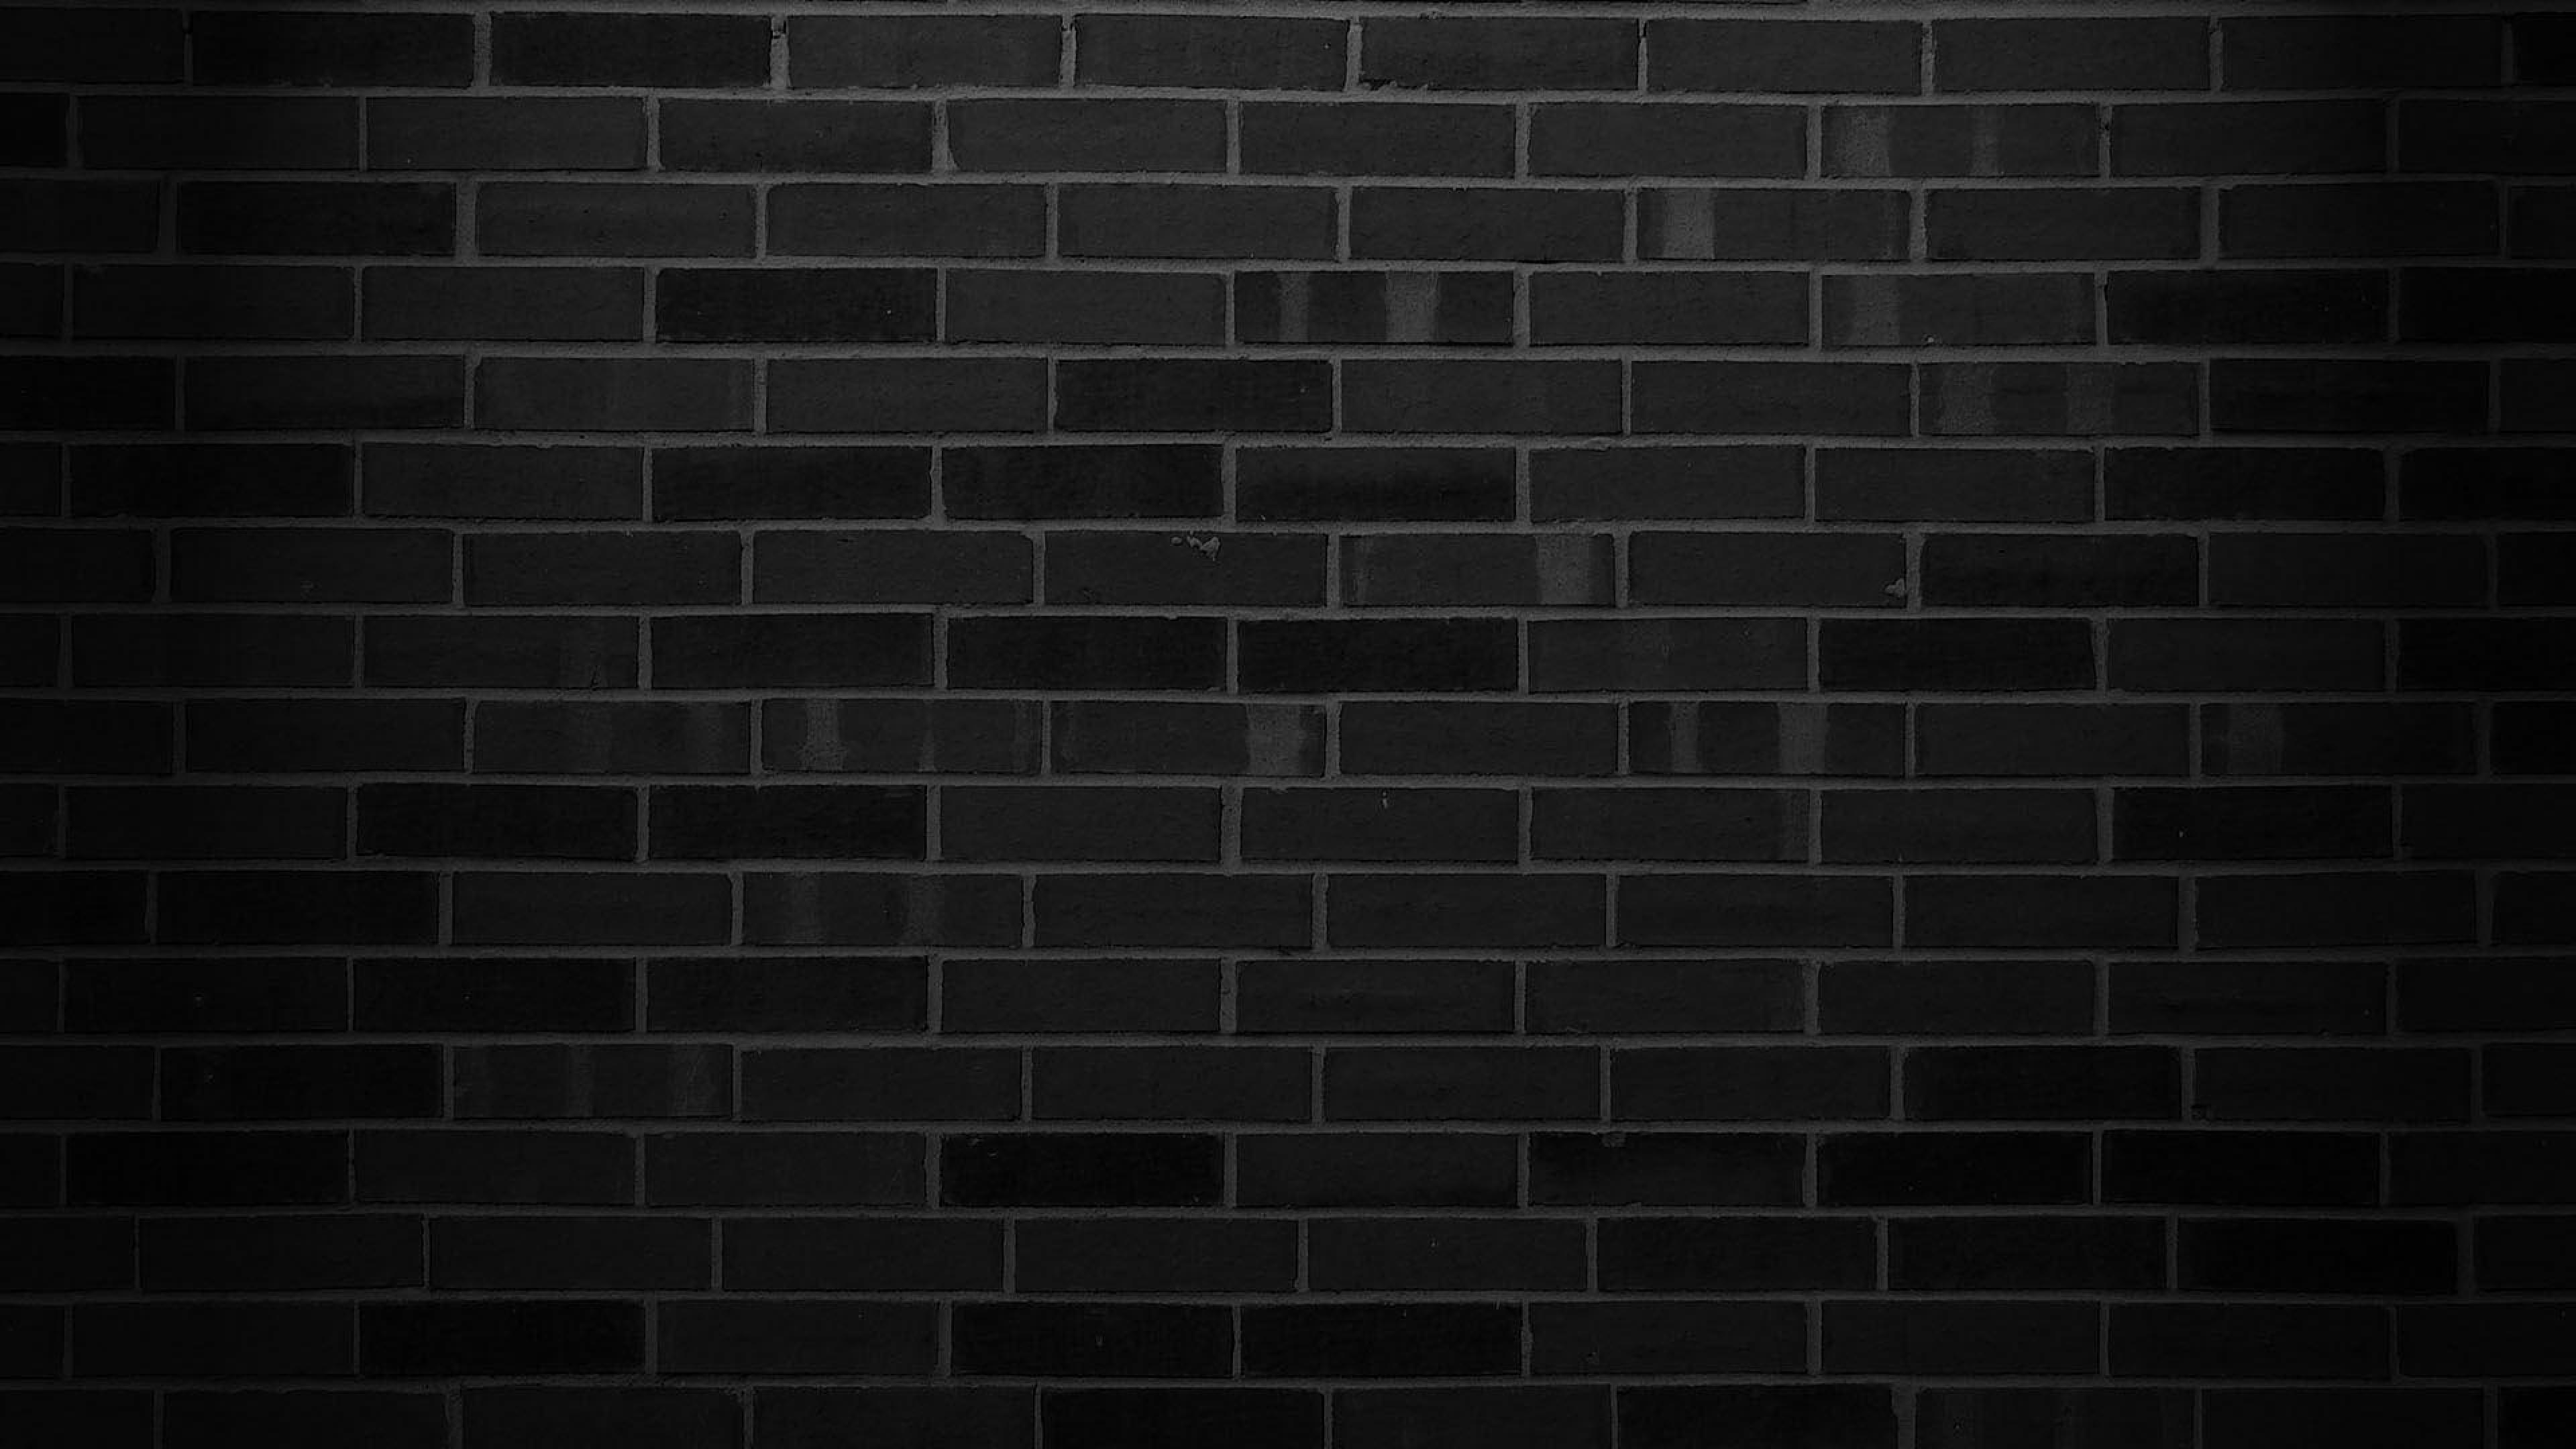 Brick Wall Pattern Photography Texture Black Hd 3840x2160 Black Wall Pattern Home Decor Linon Home Decor Decorator Modern Decorating Collection Decorators Walmart Contemporary Outlet Yosemite Aller Design